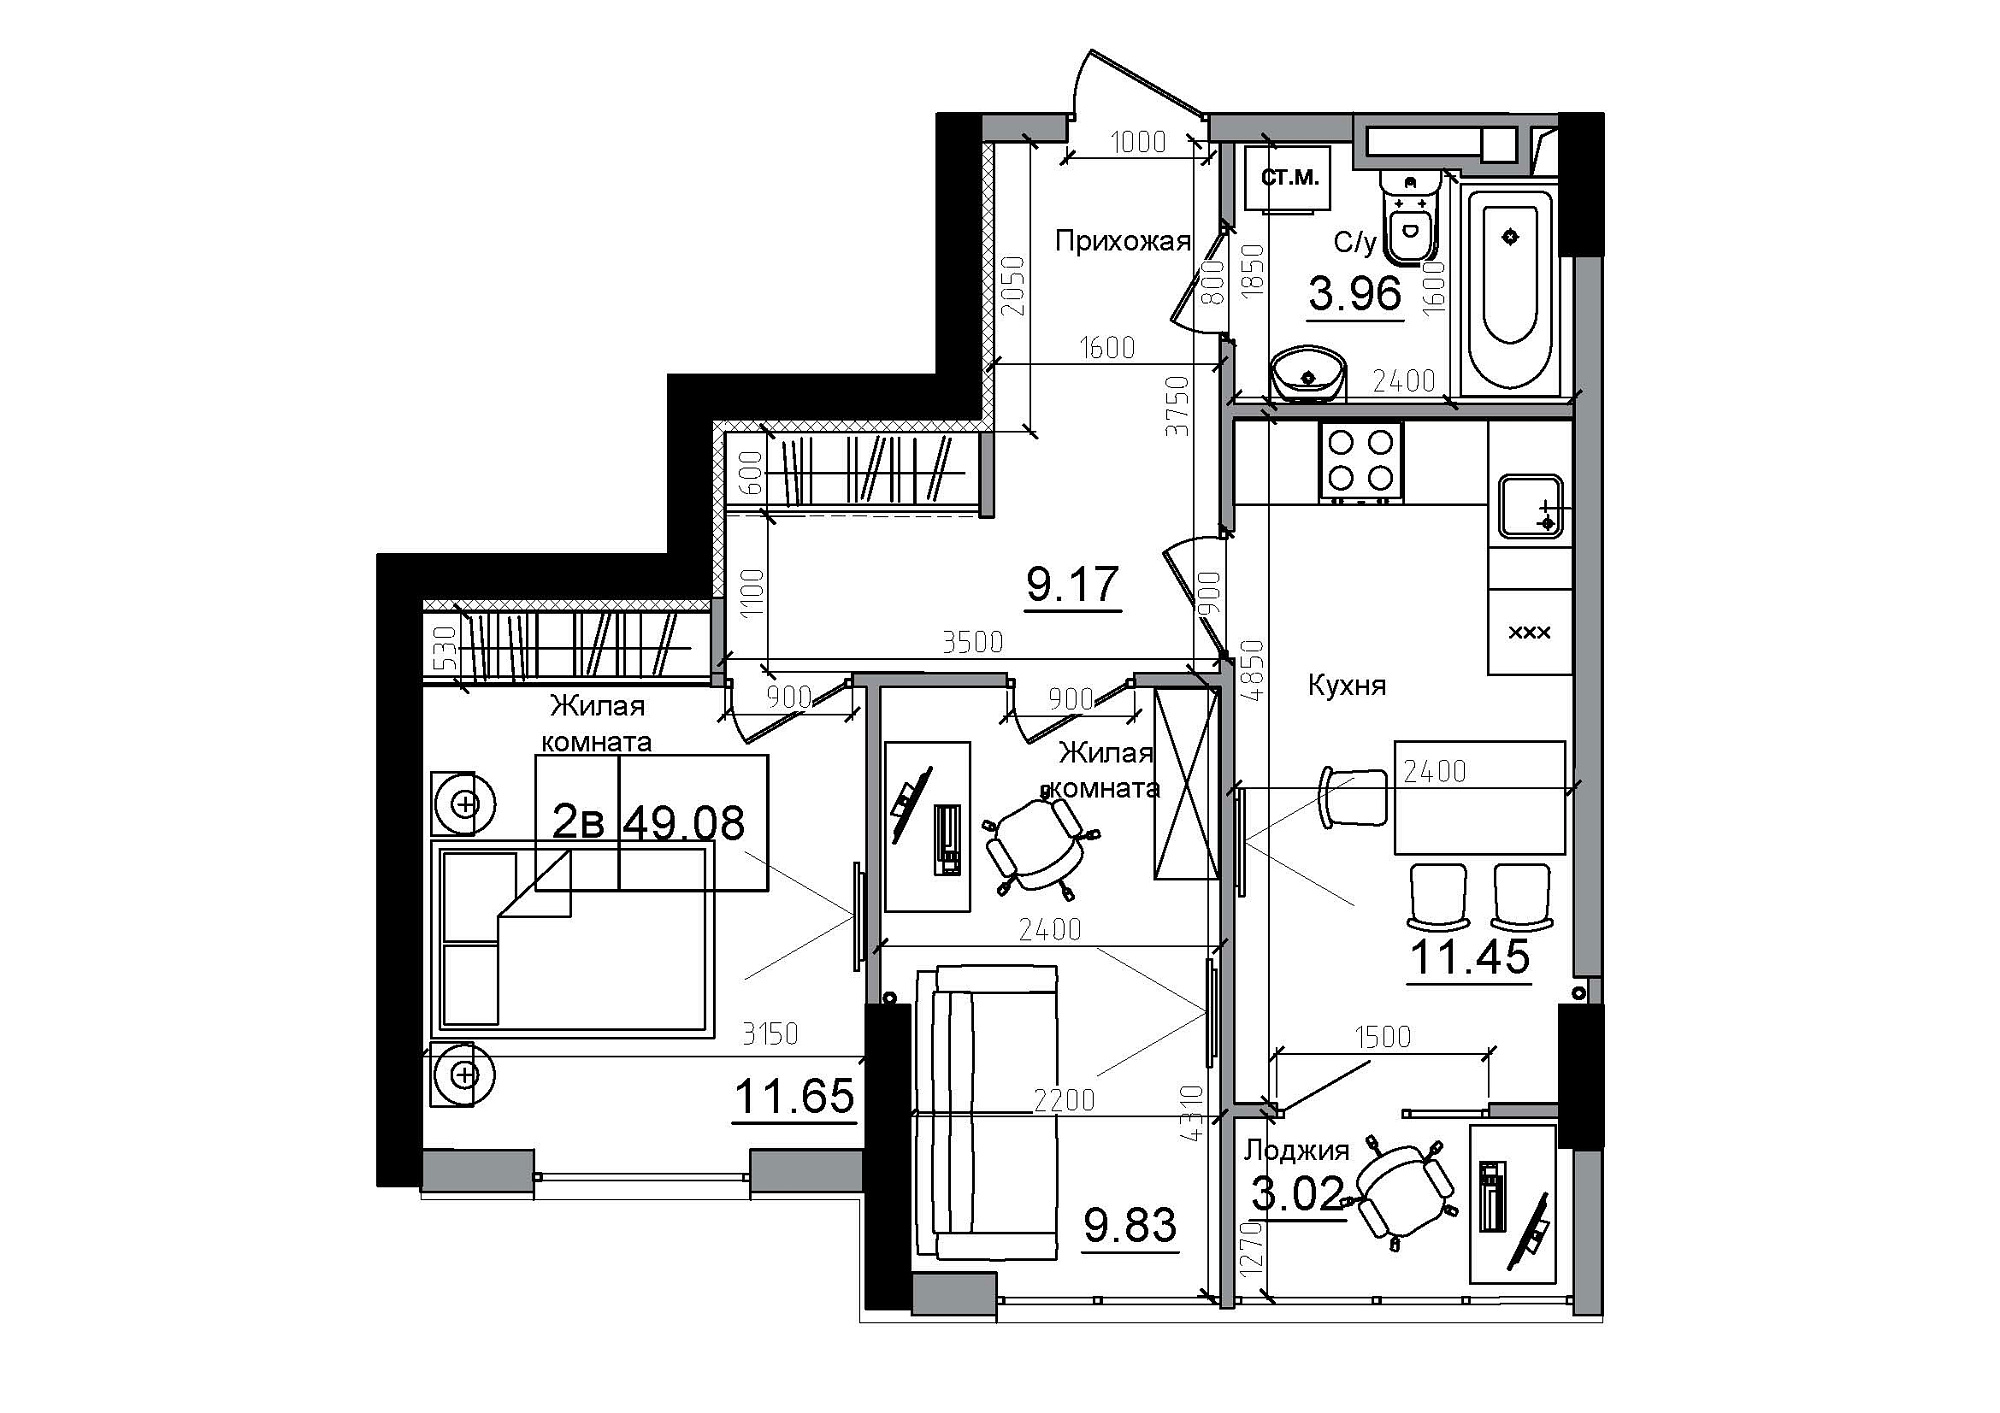 Planning 2-rm flats area 49.08m2, AB-12-10/00015.